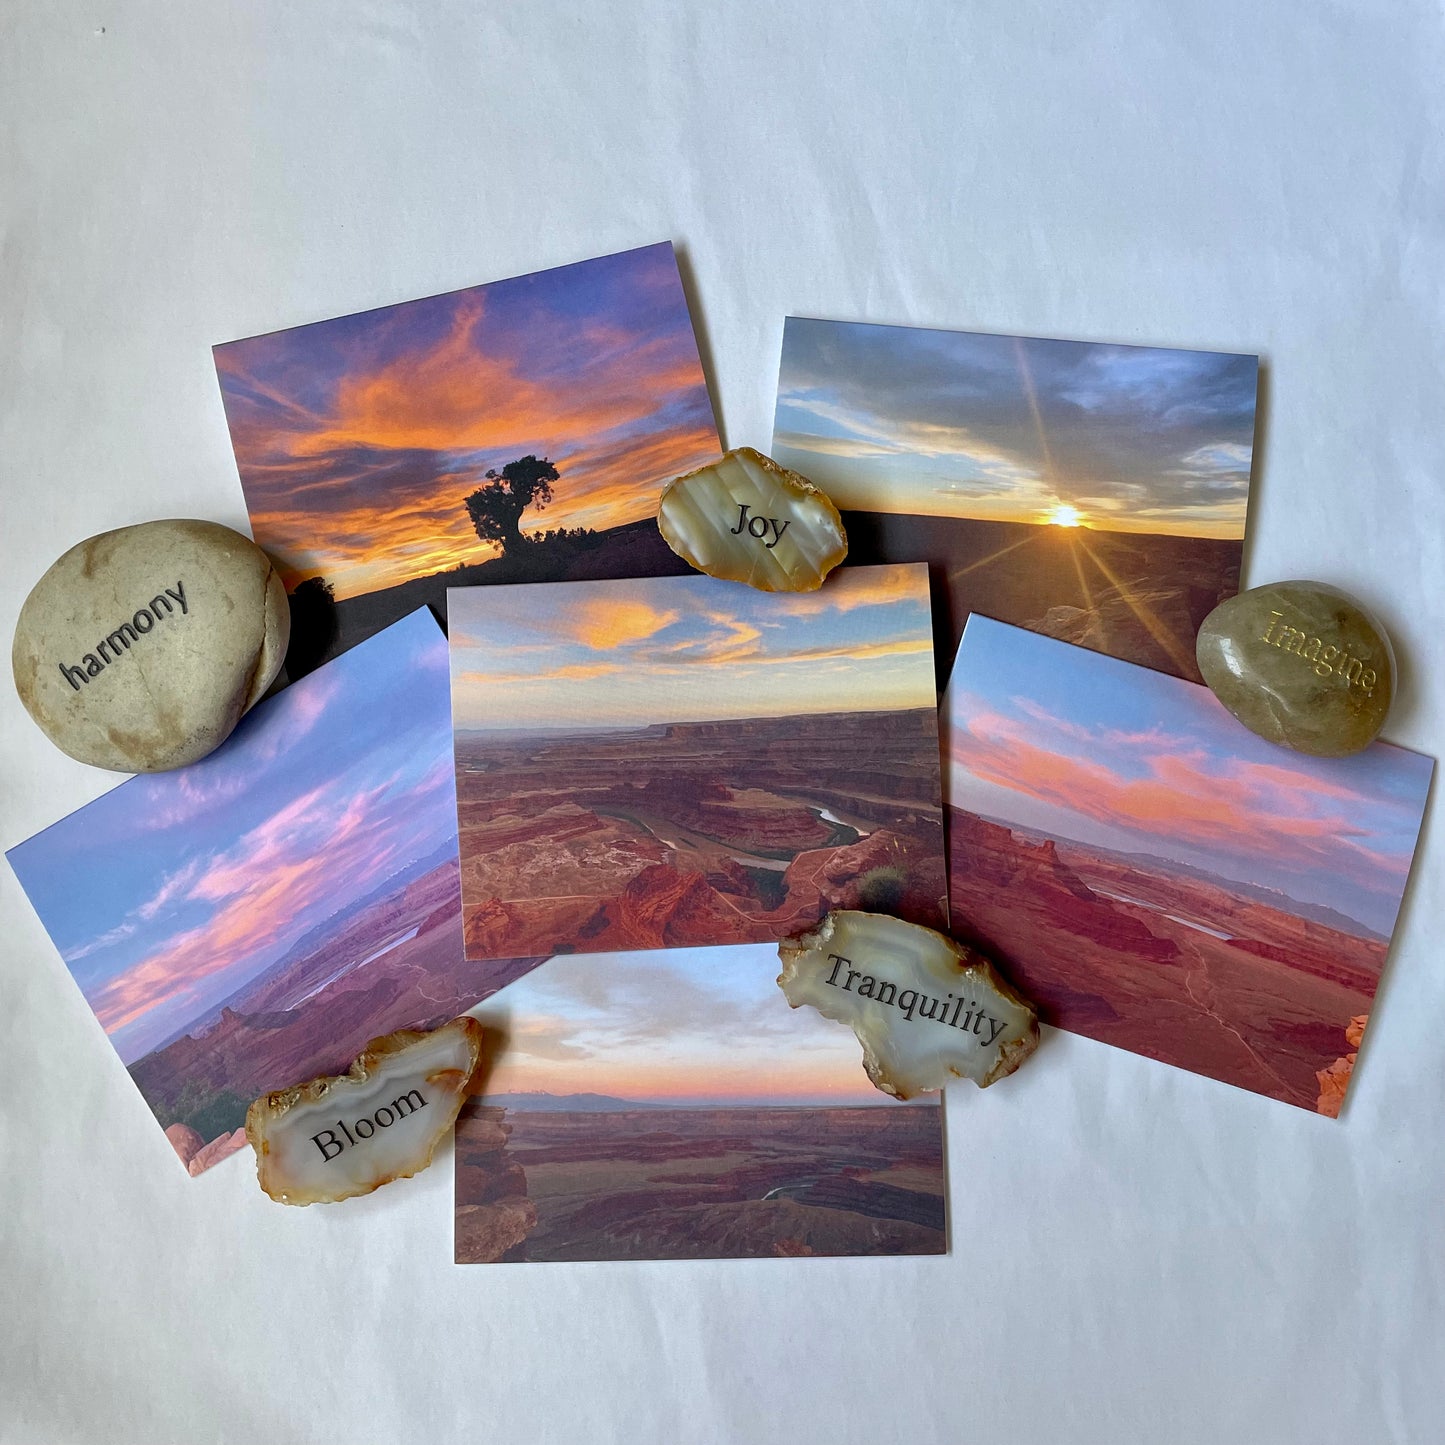 Desert Dreams Moab Collection Original Nature Photography Greeting Card Boxed Set of 6 with Kraft Envelopes